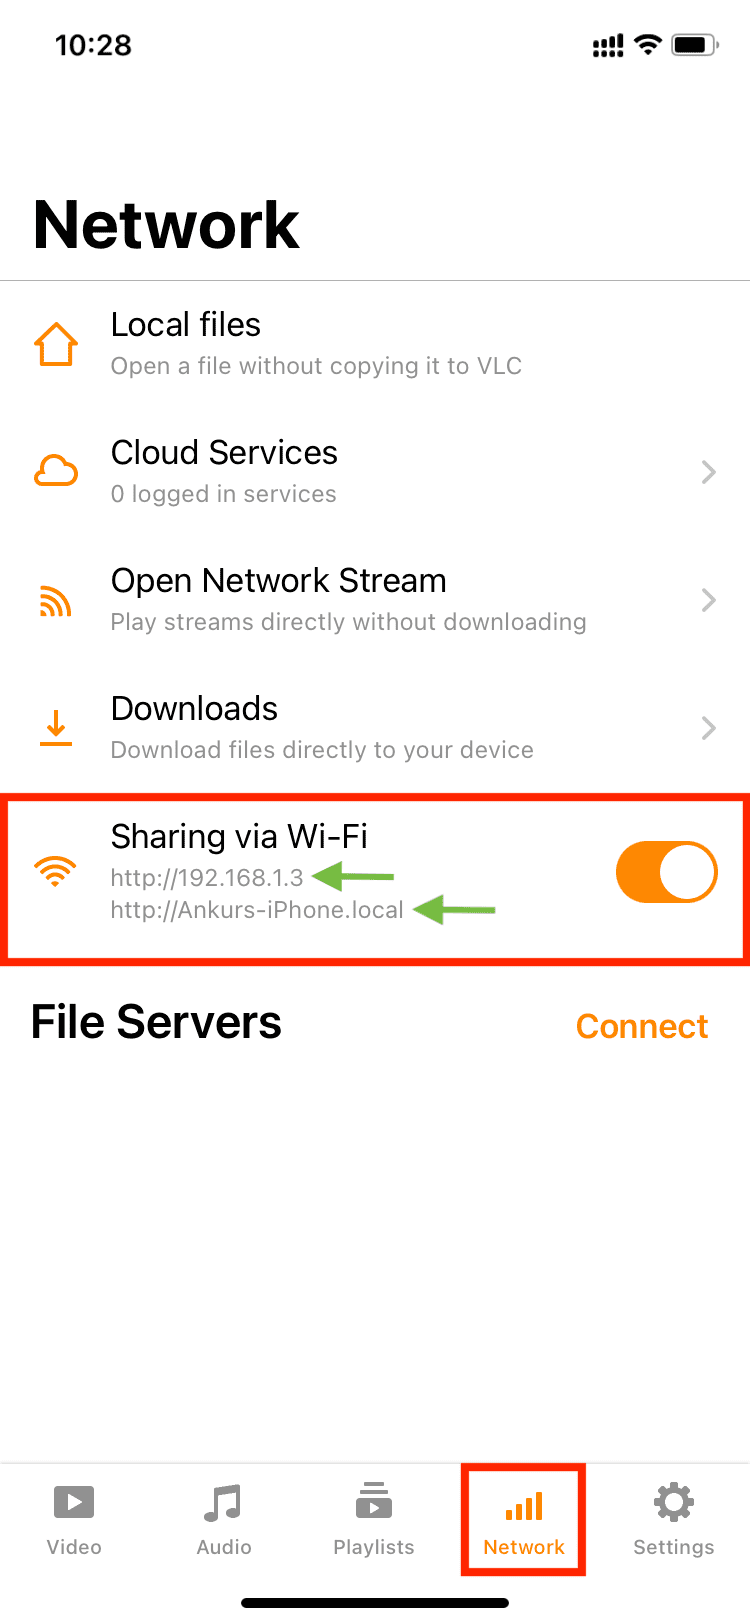 Enable Sharing via Wi-Fi in VLC on iPhone